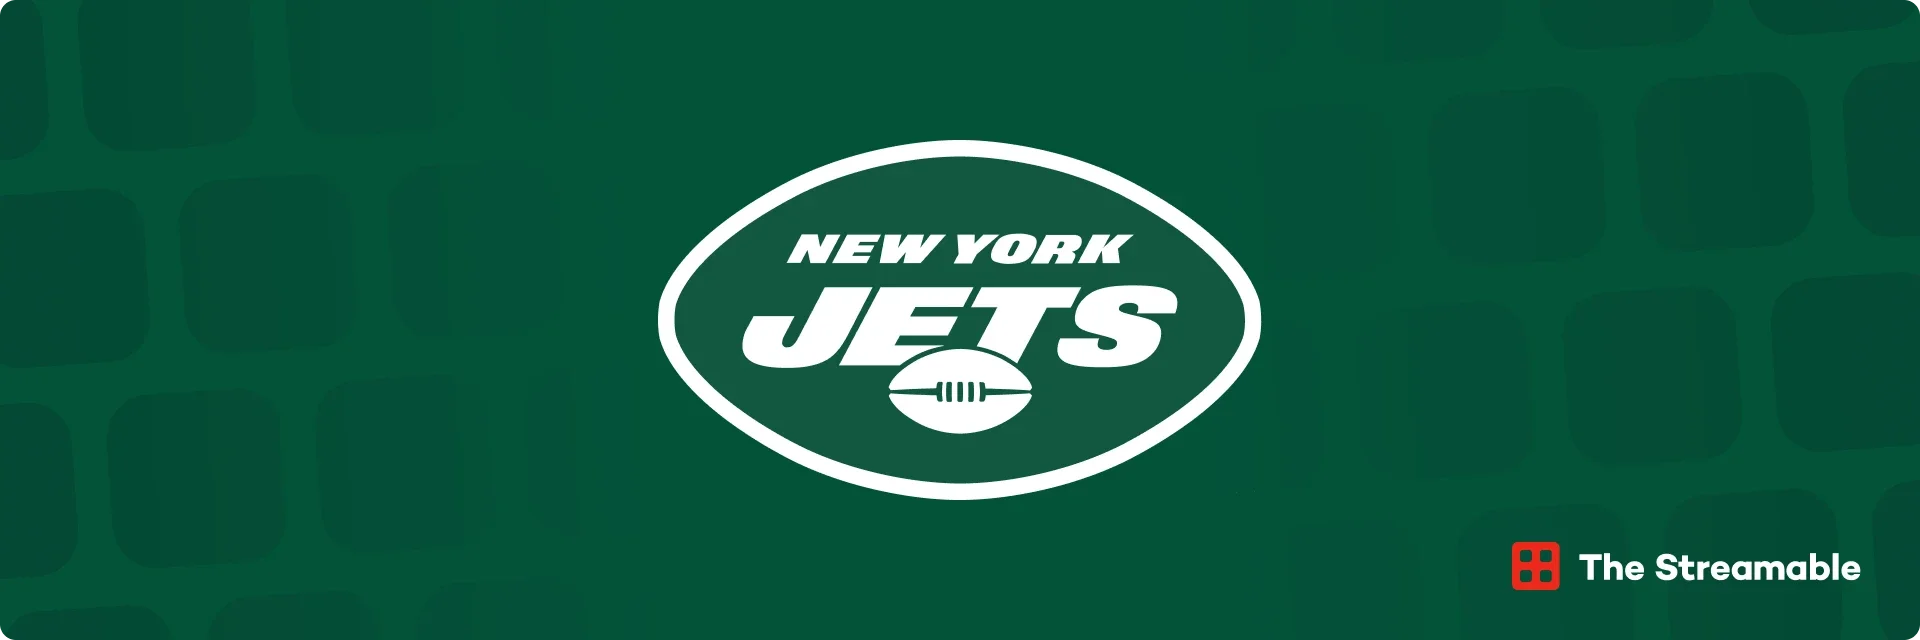 How to Watch New York Jets Games Online Live Without Cable